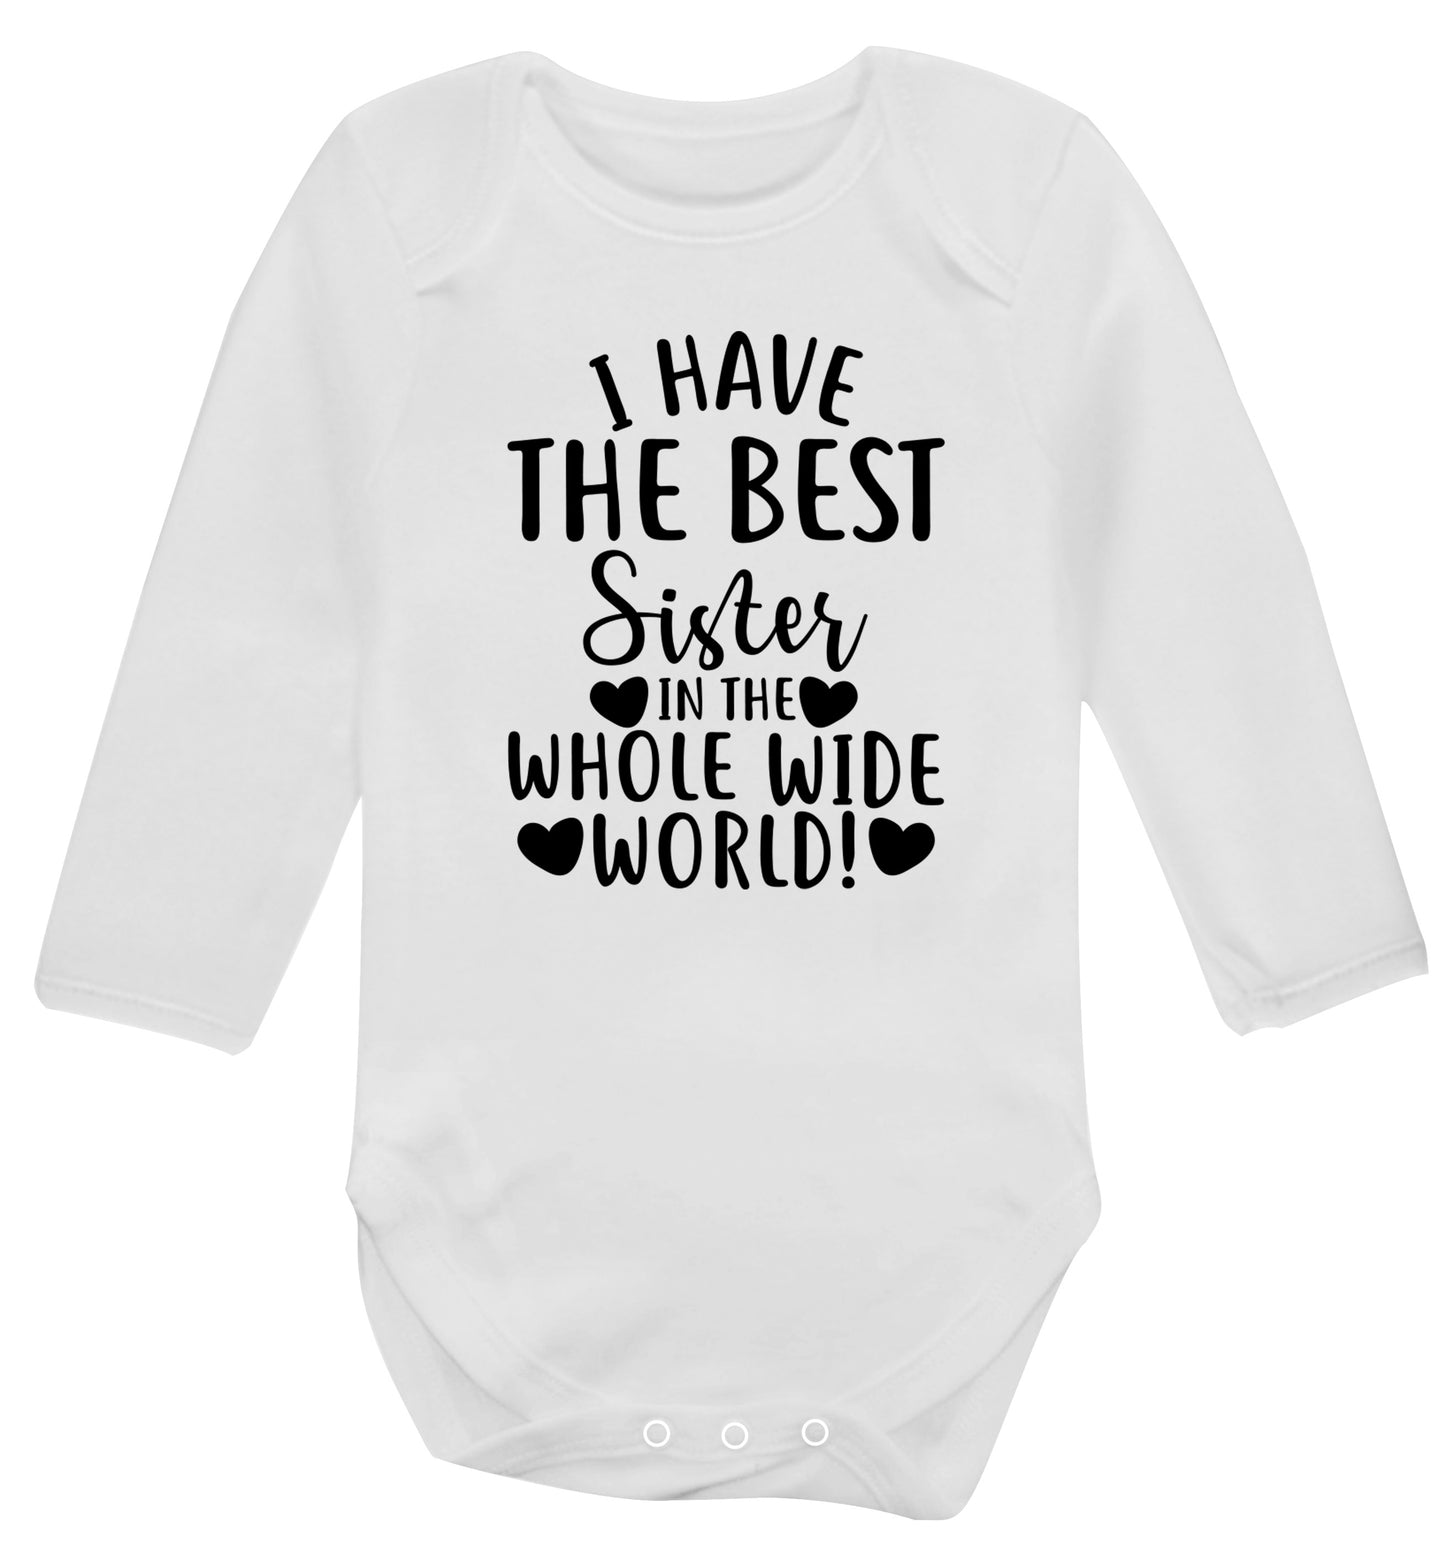 I have the best sister in the whole wide world! Baby Vest long sleeved white 6-12 months